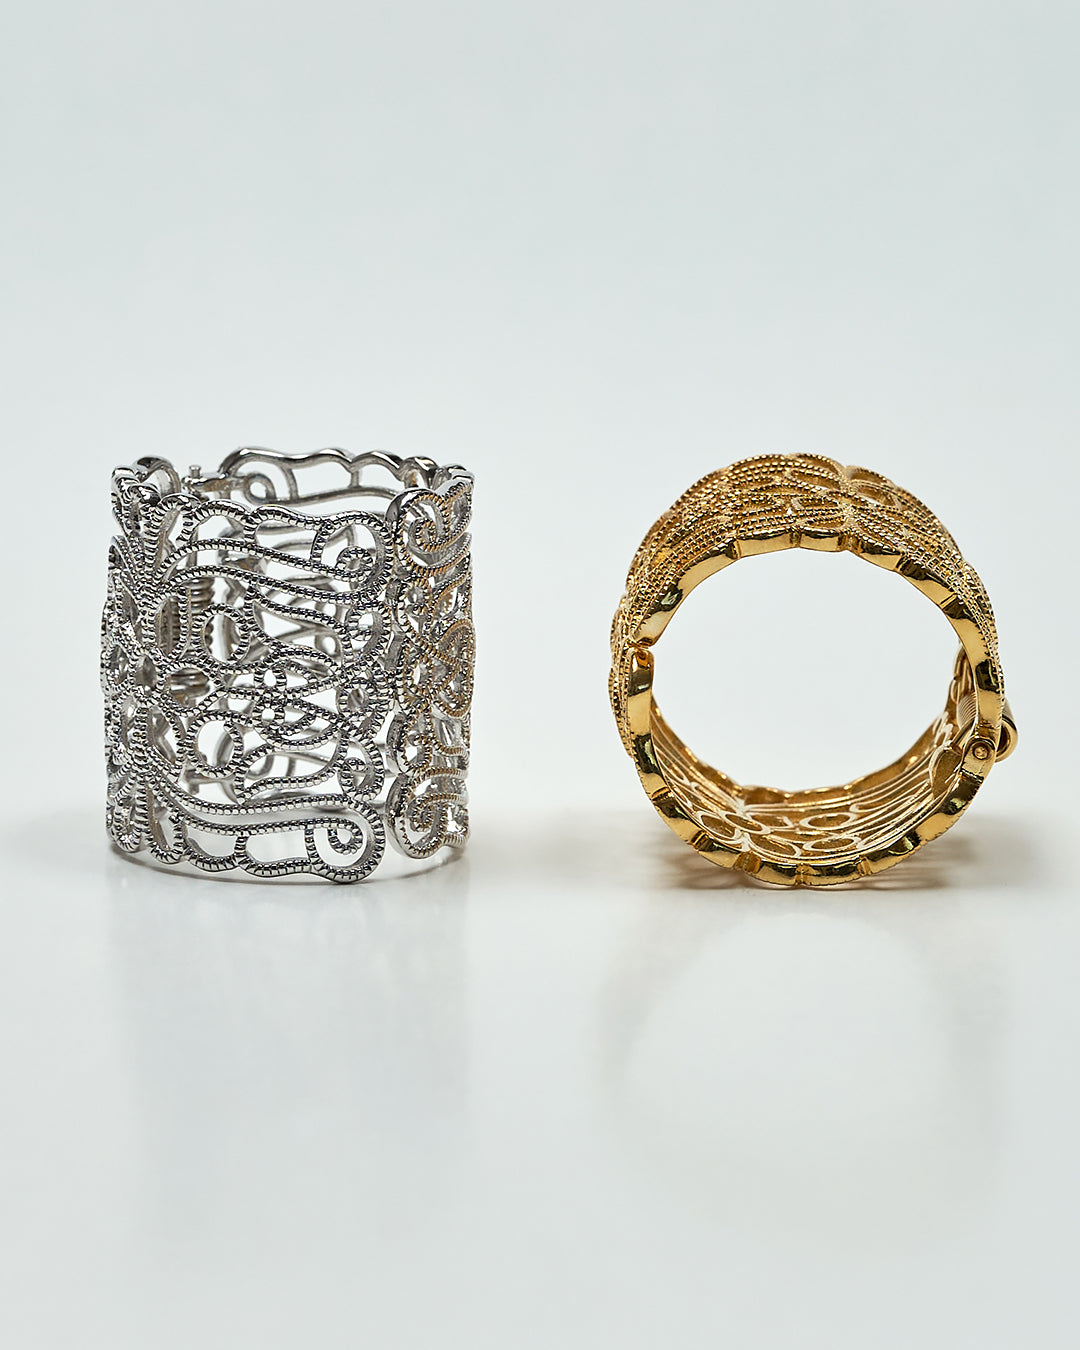 Filigree HIGH LAND Scarf Ring 18K White Gold Plated Over Brass by Alesia Chaika